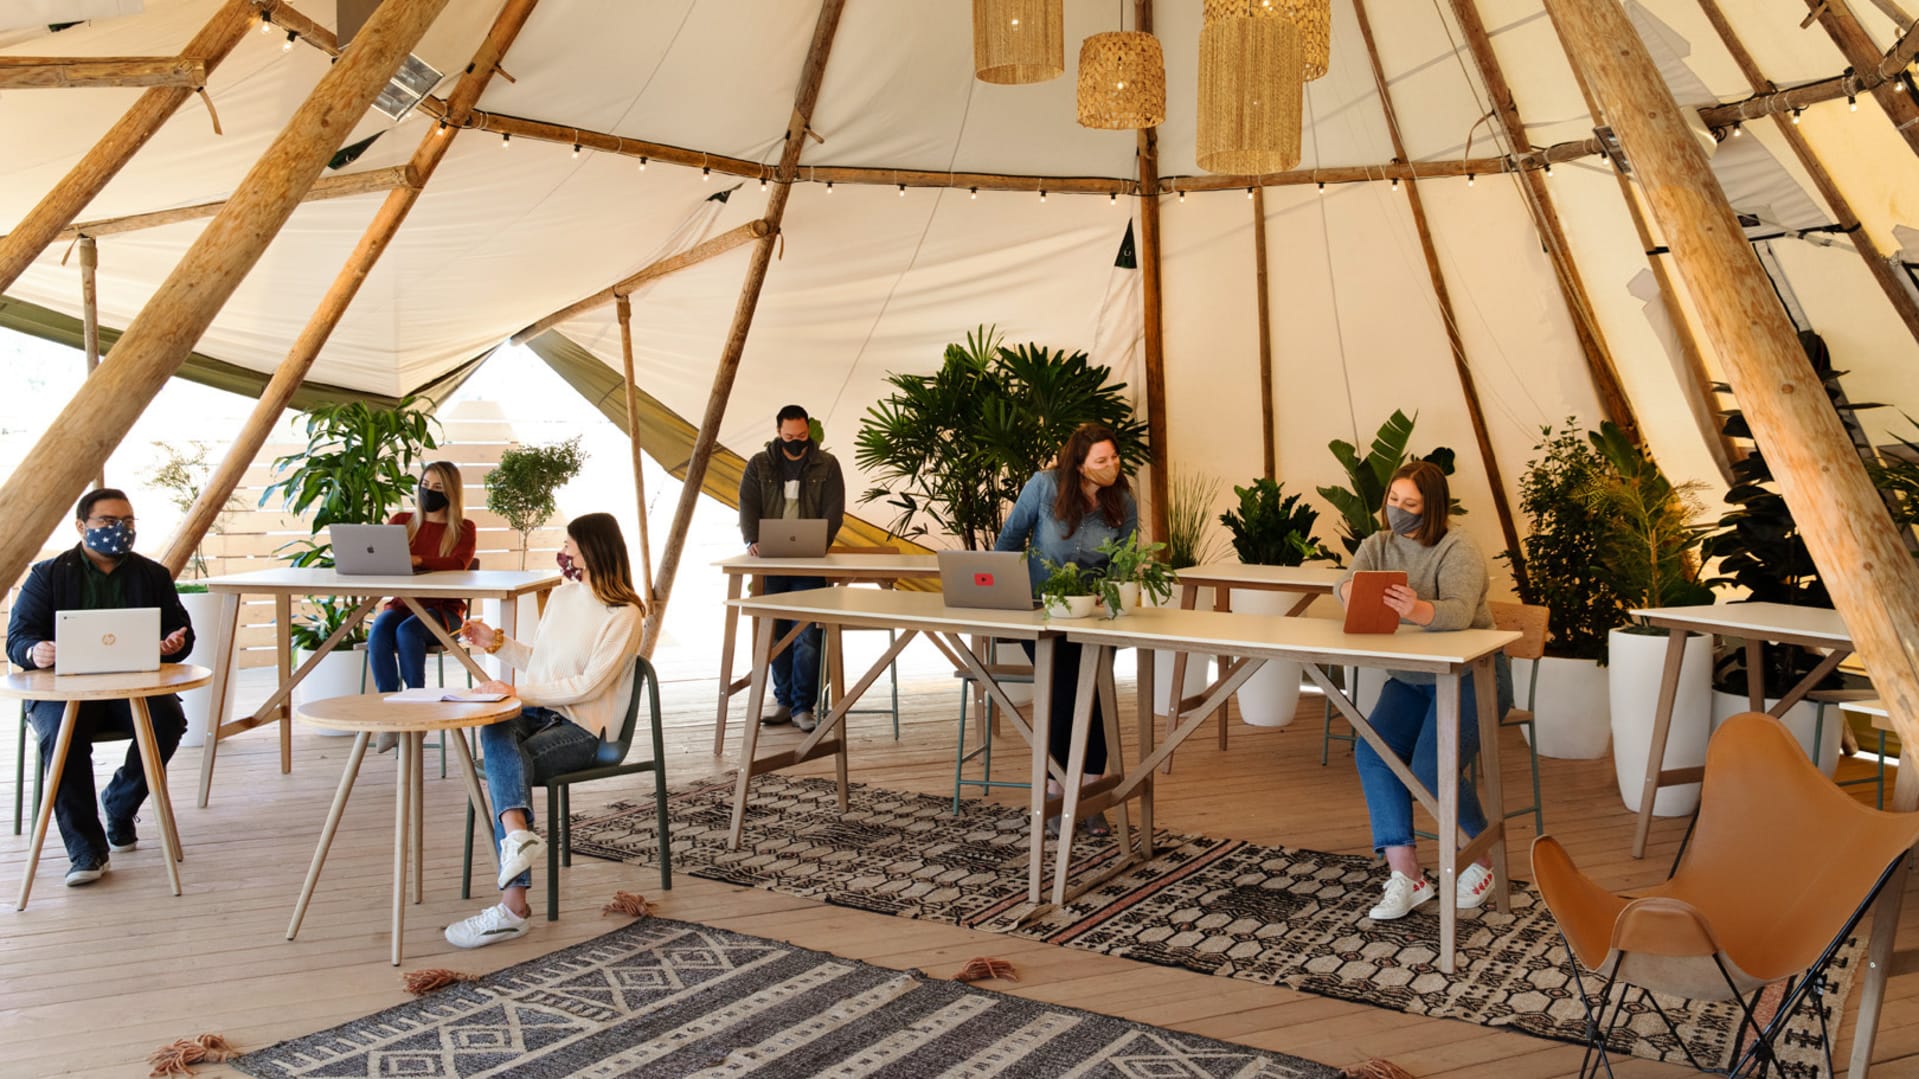 The hot new amenity at Google and other tech companies? Tents